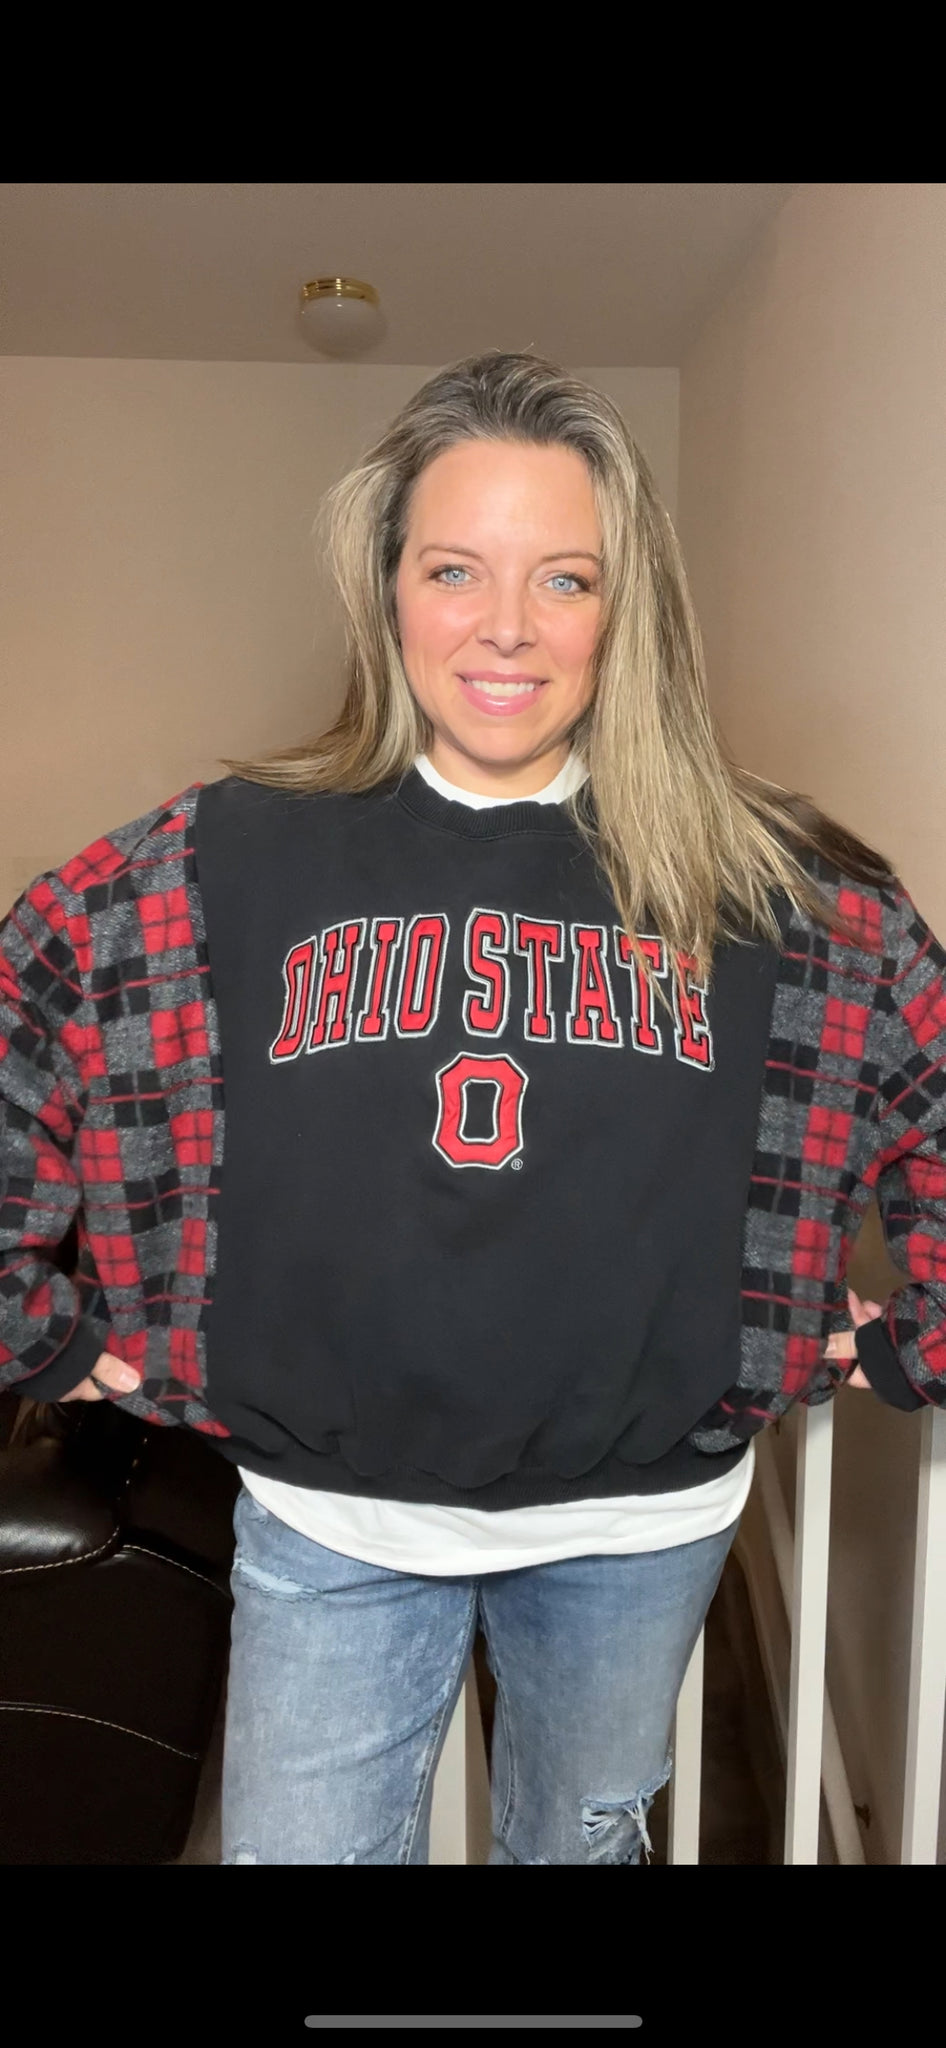 Ohio State - woman’s M/L - wide but shorter